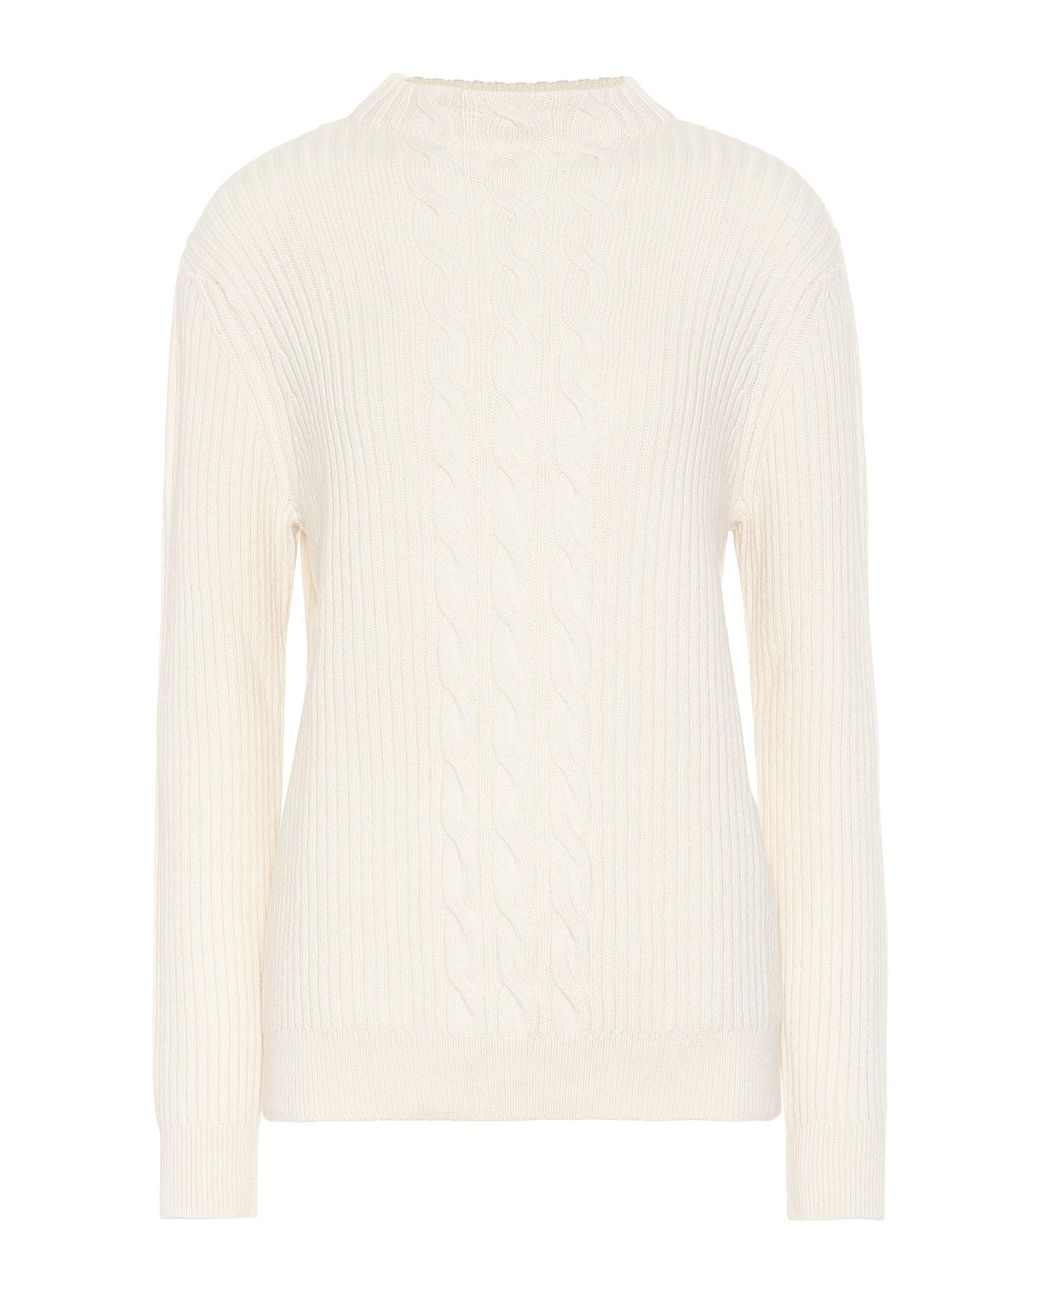 A.P.C. Nico Wool And Cashmere Sweater - Lyst